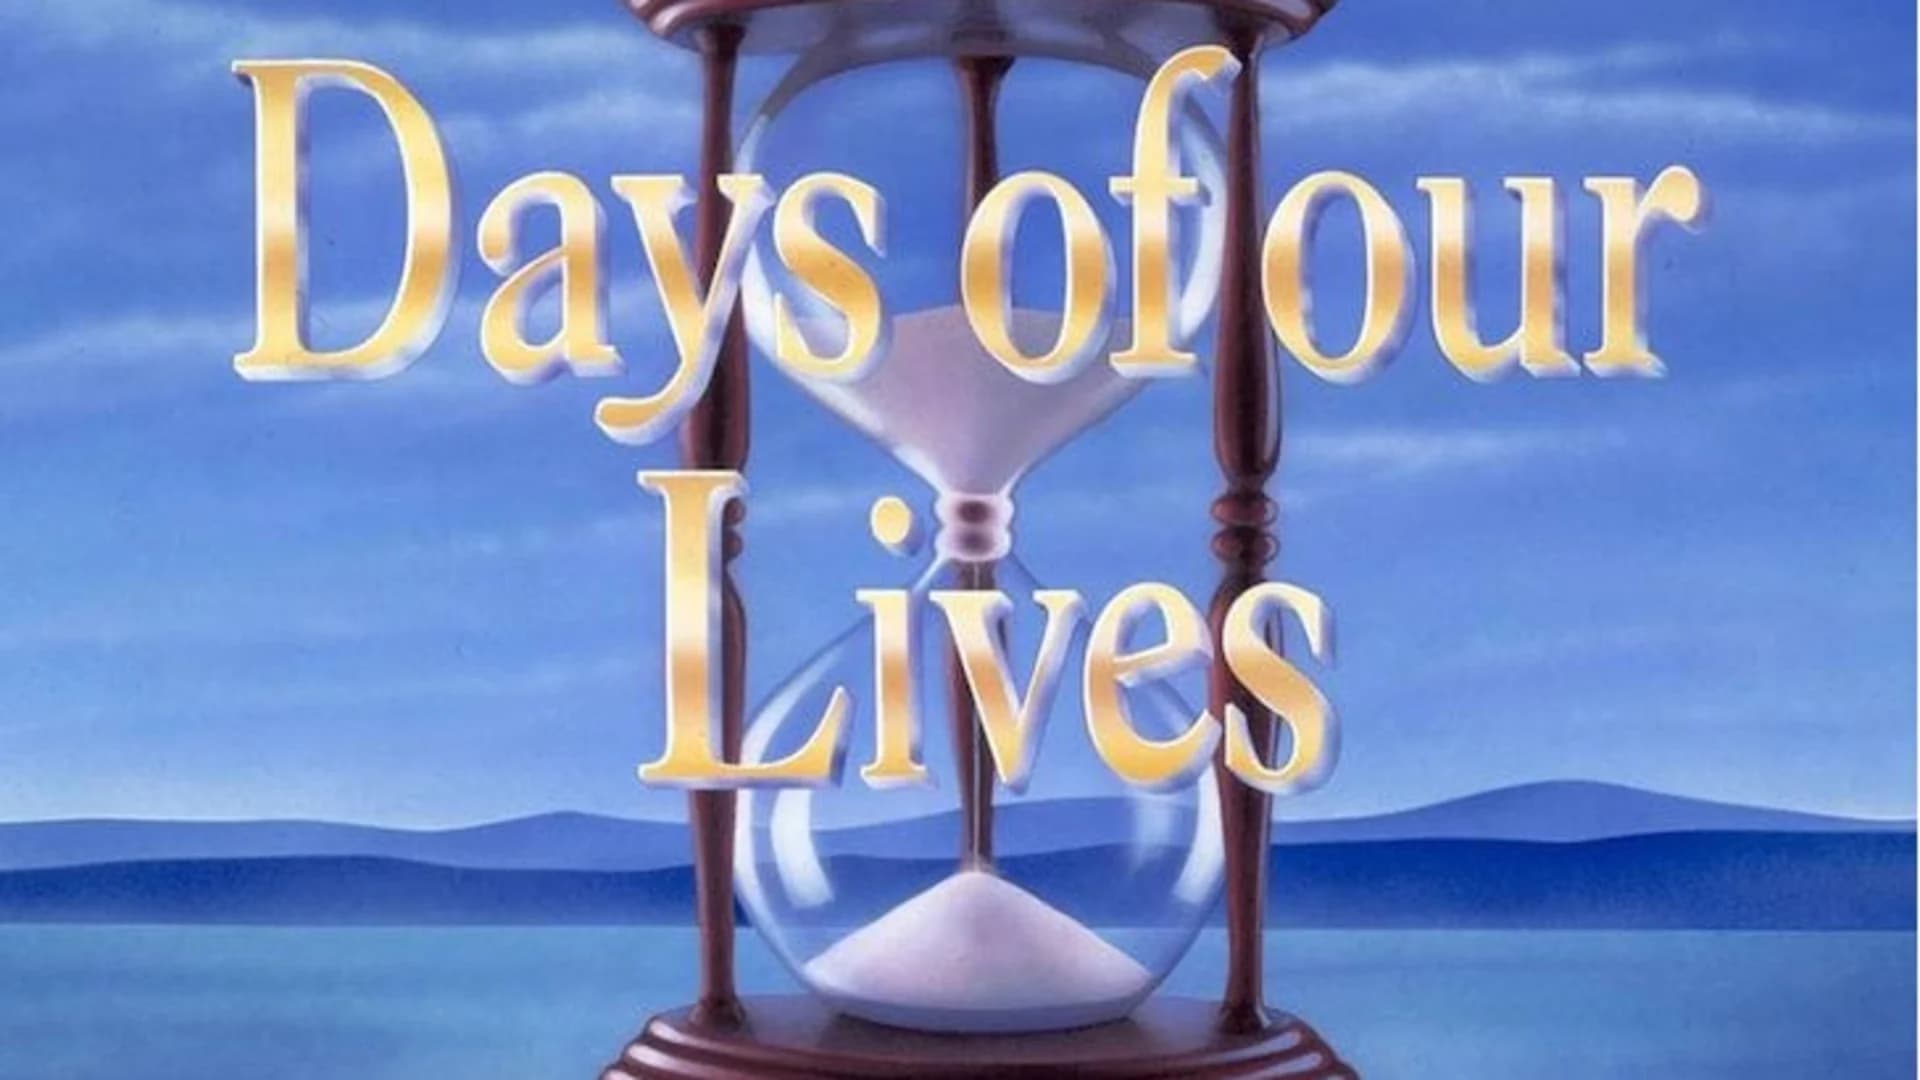 Report: Entire “Days of Our Lives’ cast released from contracts